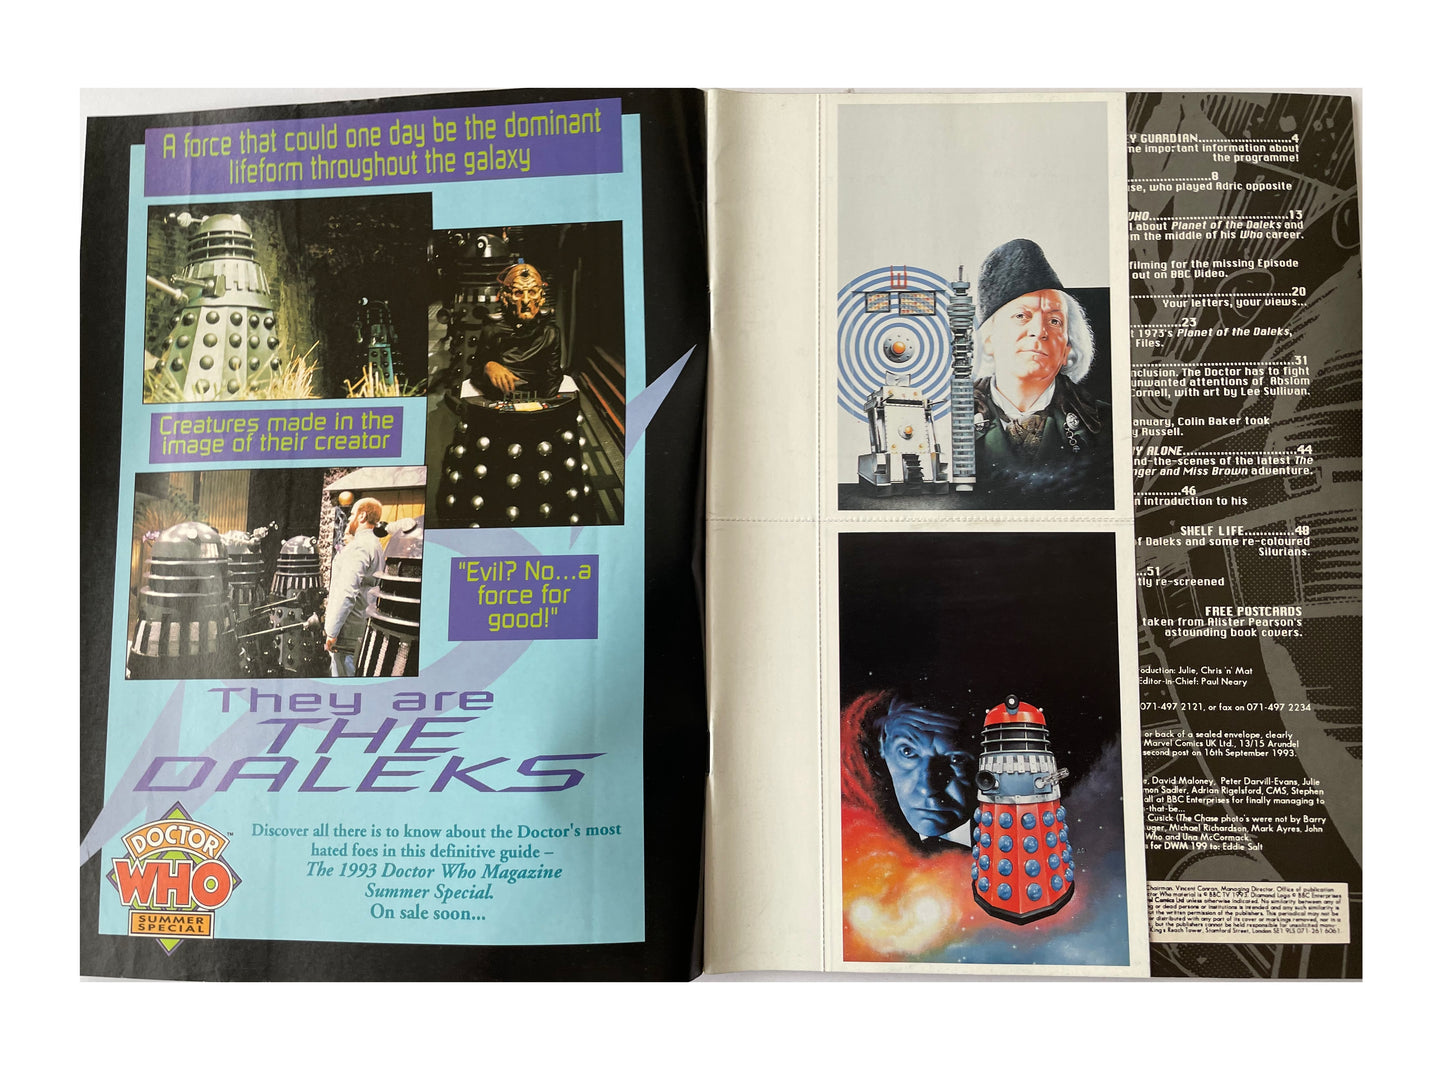 Vintage BBC Doctor Dr Who Magazine Issue Number 202 4th August 1993 - With Free Postcards - Shop Stock Room Find